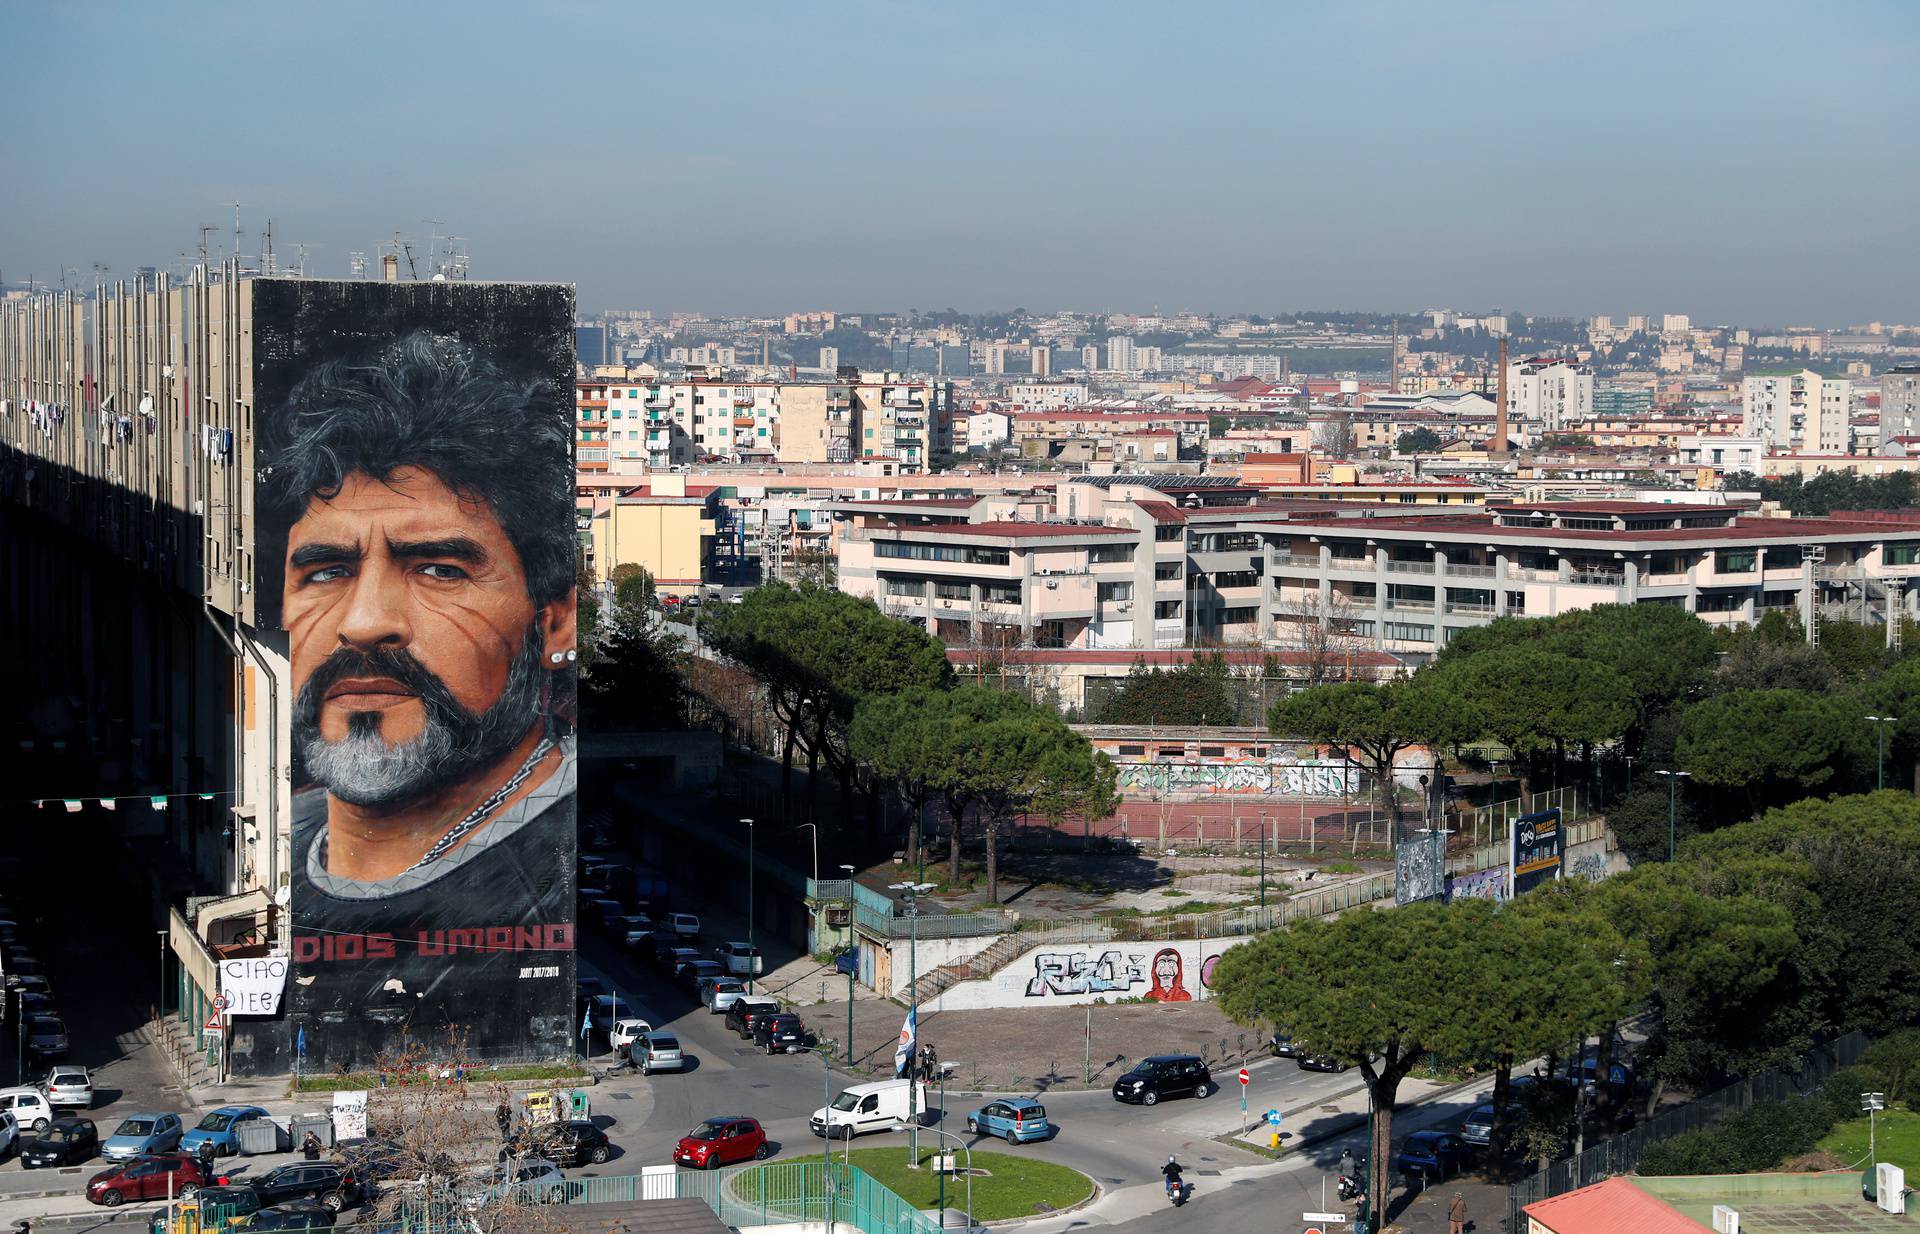 A general view shows a mural by artist Jorit depicting late Argentine soccer legend Diego Maradona, in Naples